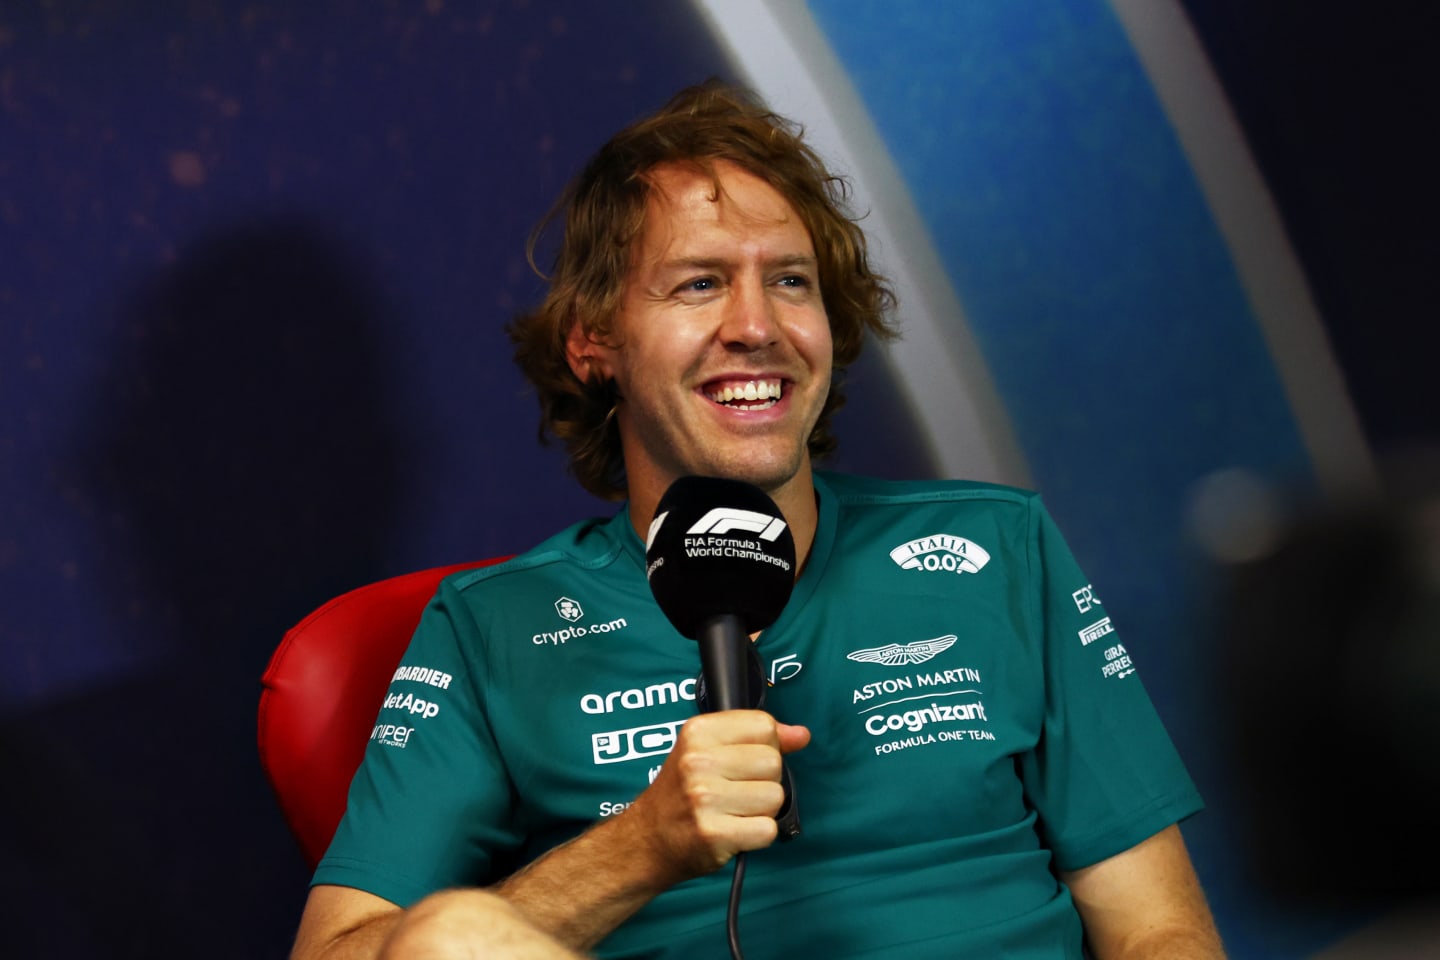 LE CASTELLET, FRANCE - JULY 21: Sebastian Vettel of Germany and Aston Martin F1 Team talks in the Drivers Press Conference during previews ahead of the F1 Grand Prix of France at Circuit Paul Ricard on July 21, 2022 in Le Castellet, France. (Photo by Bryn Lennon/Getty Images)